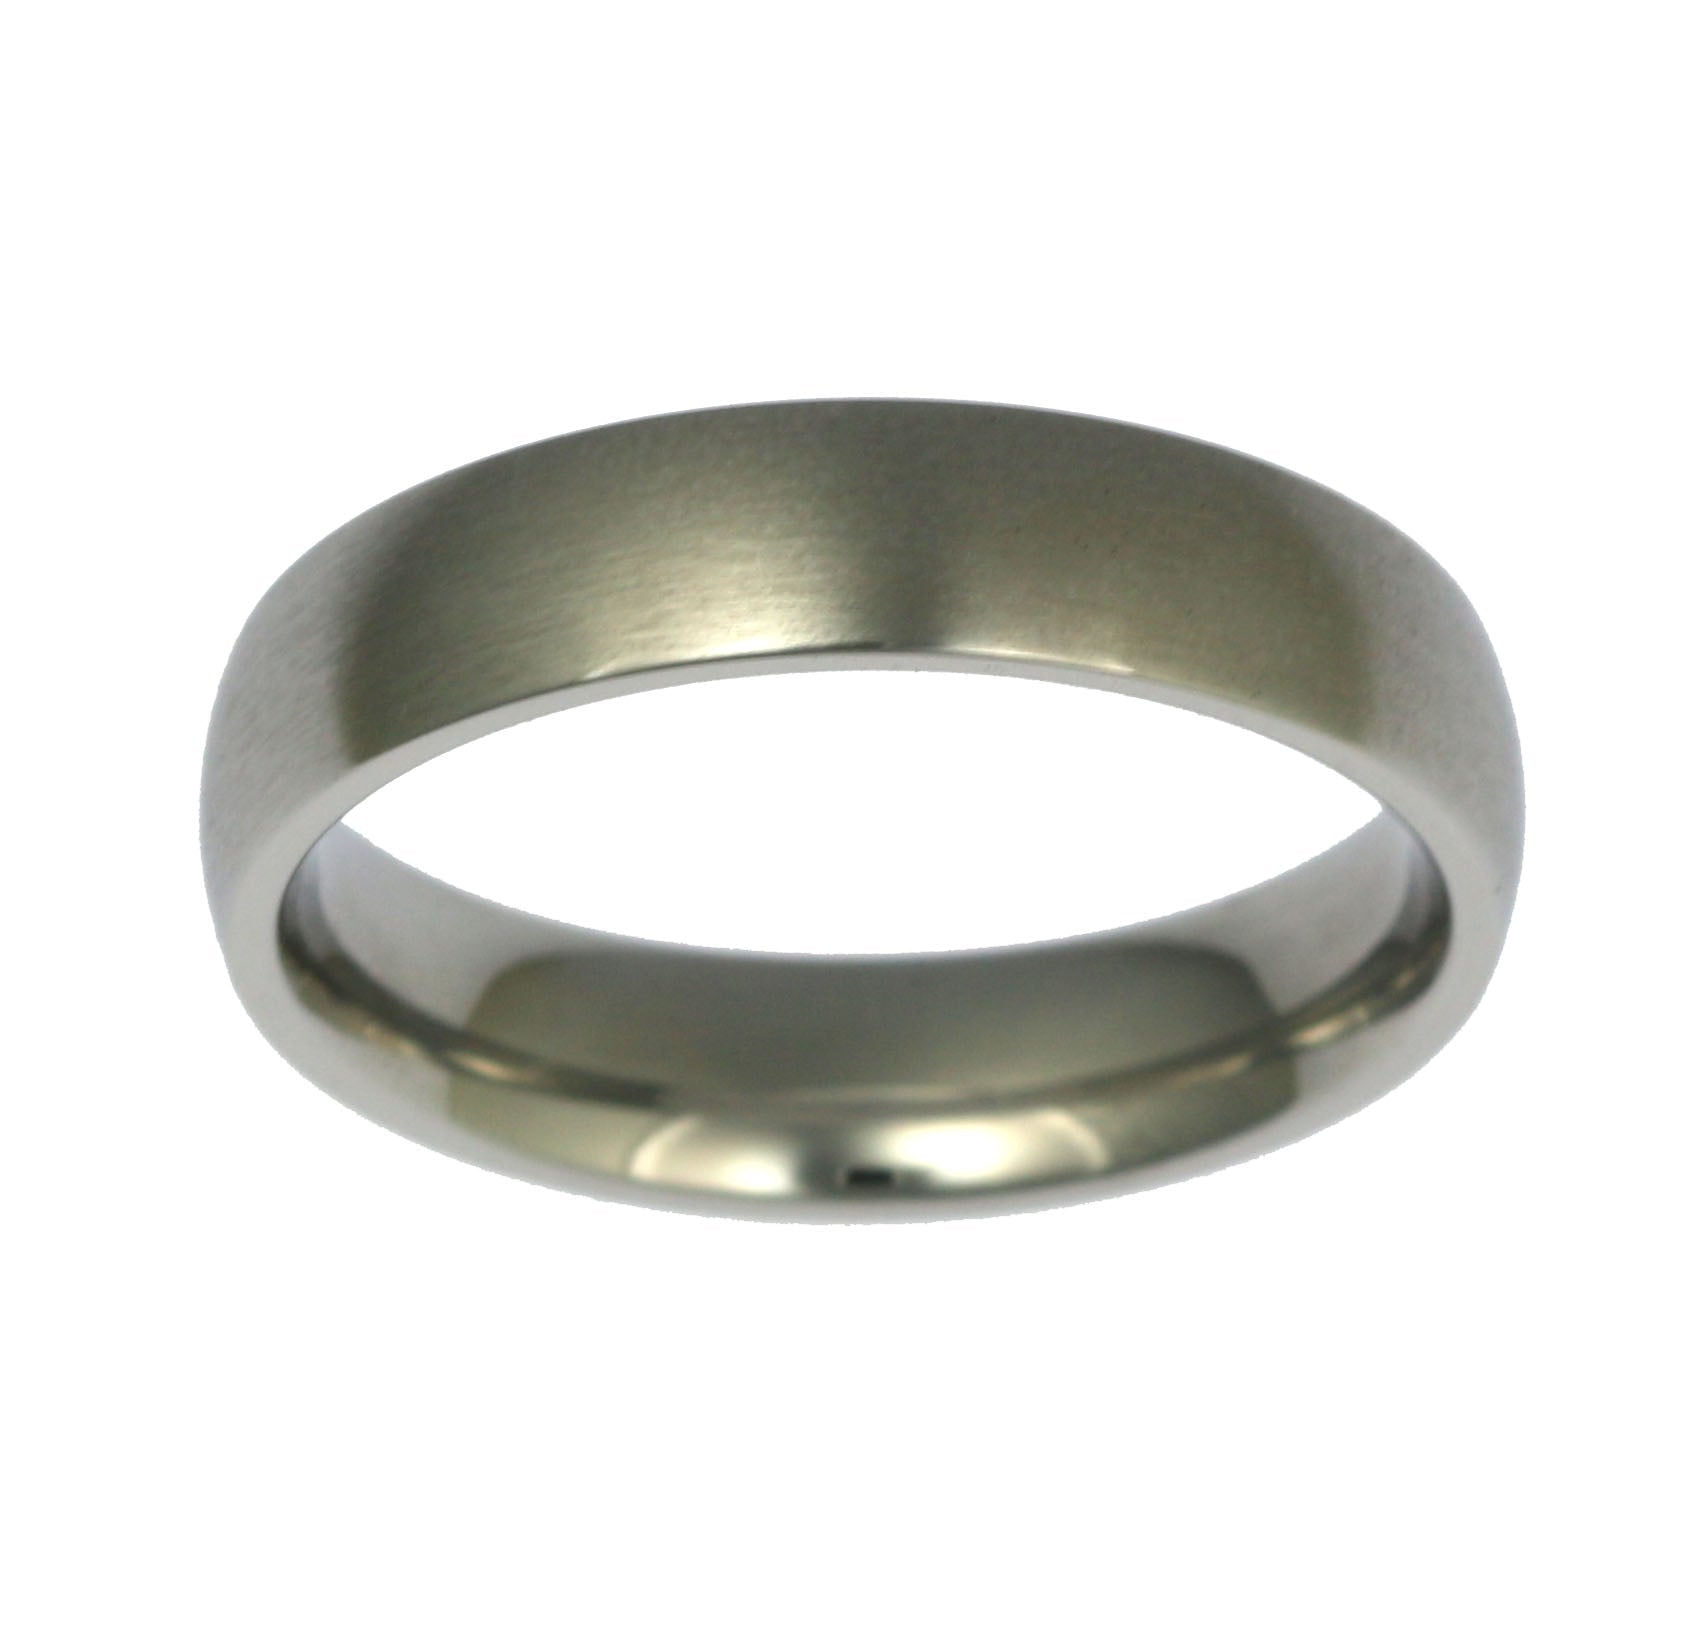 Finish of 5mm Brushed Comfort Fit Stainless Steel Men's Ring